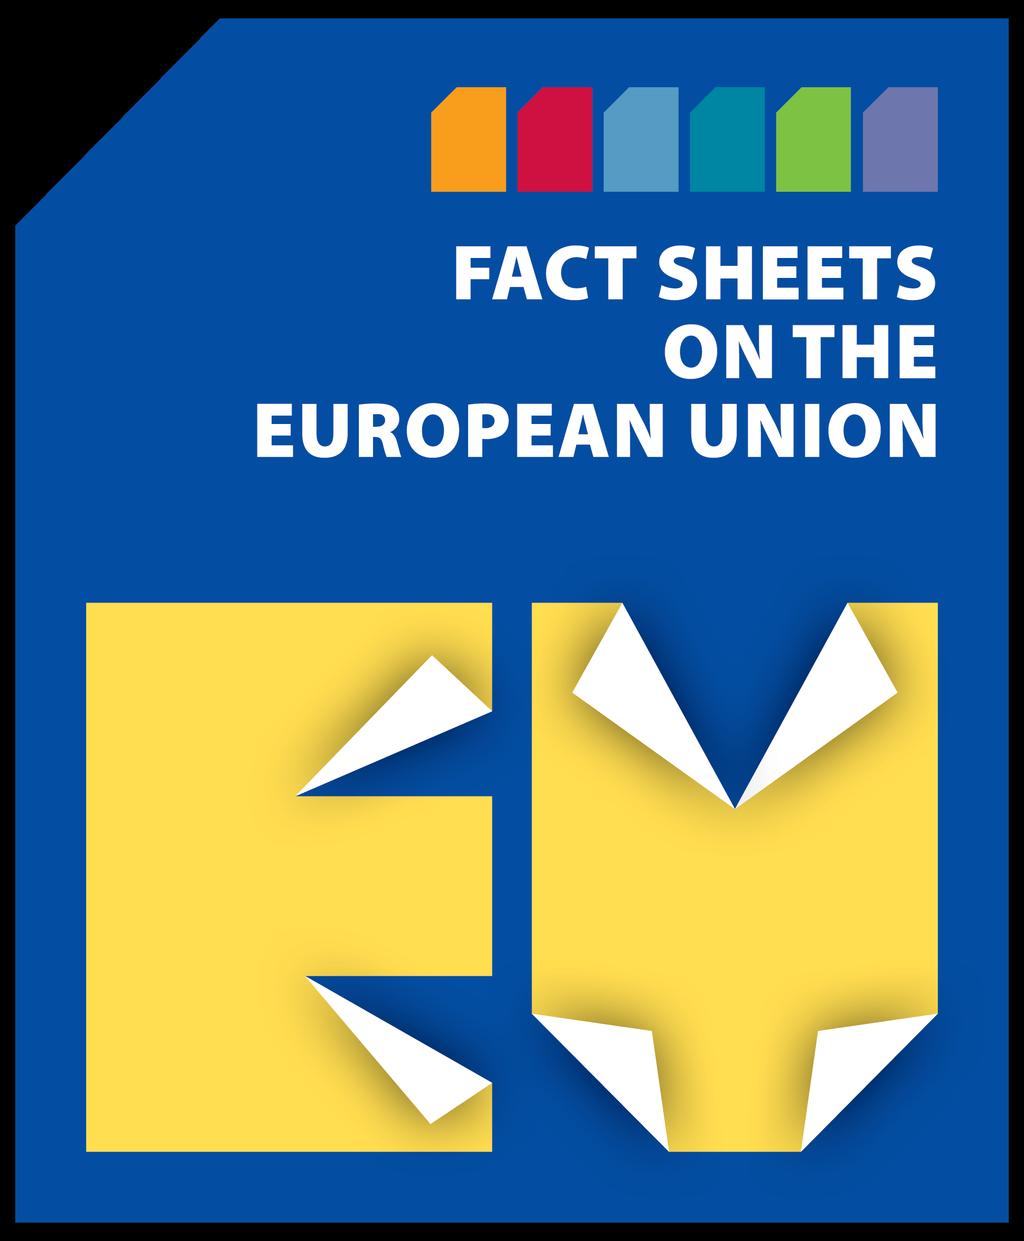 THE EUROPEAN UNION AT A GLANCE The aim of the Fact Sheets is to provide an overview of European integration and of the European Parliament s contribution to that process.